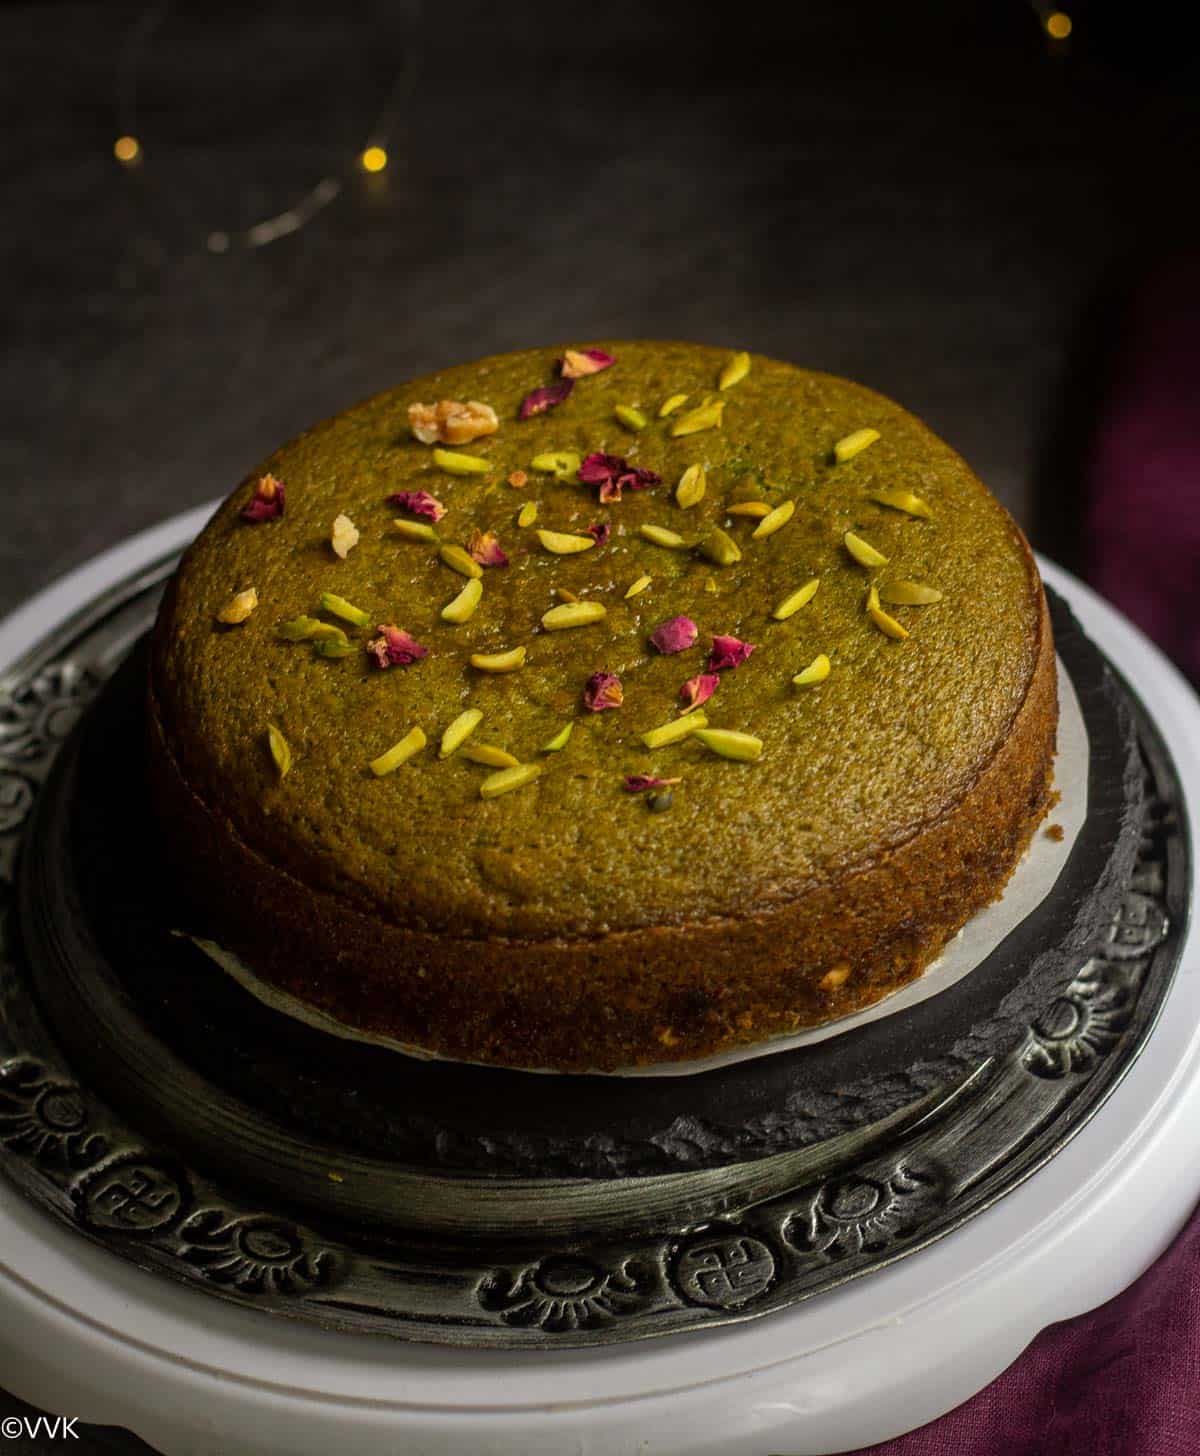 baked vegan paan cake with nuts and rosepetals on the top